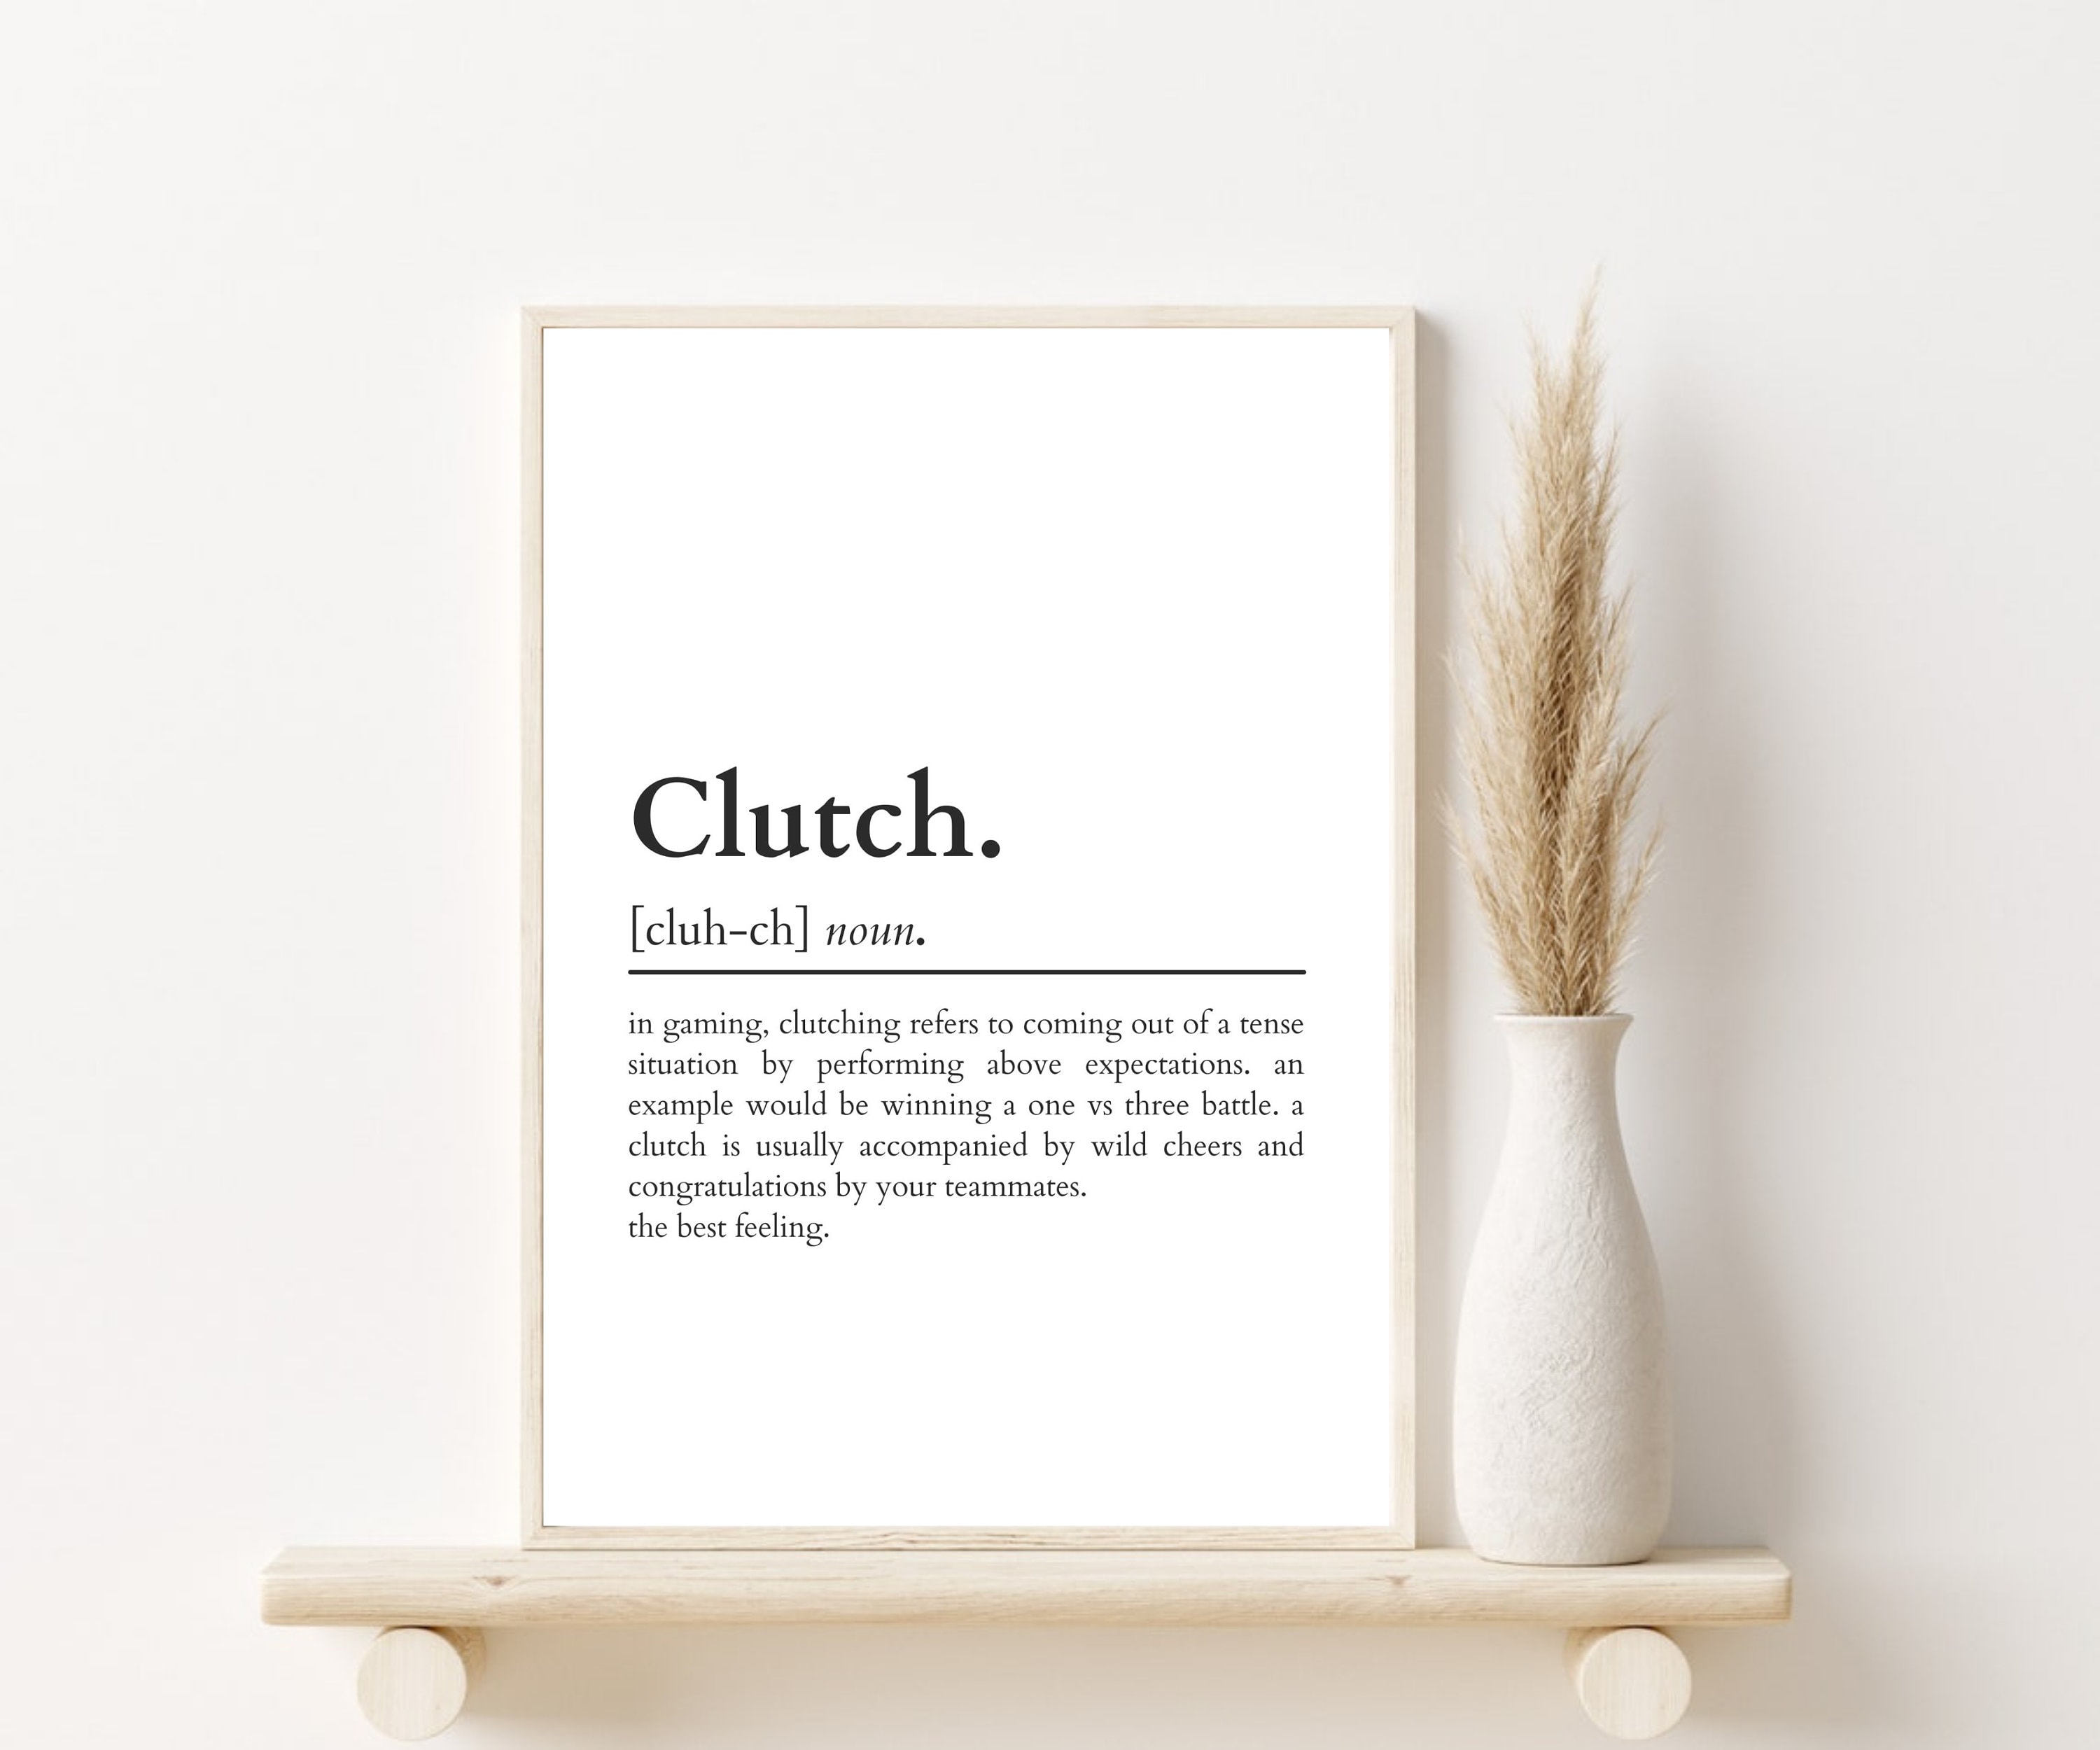 Clutch - Definition, Meaning & Synonyms